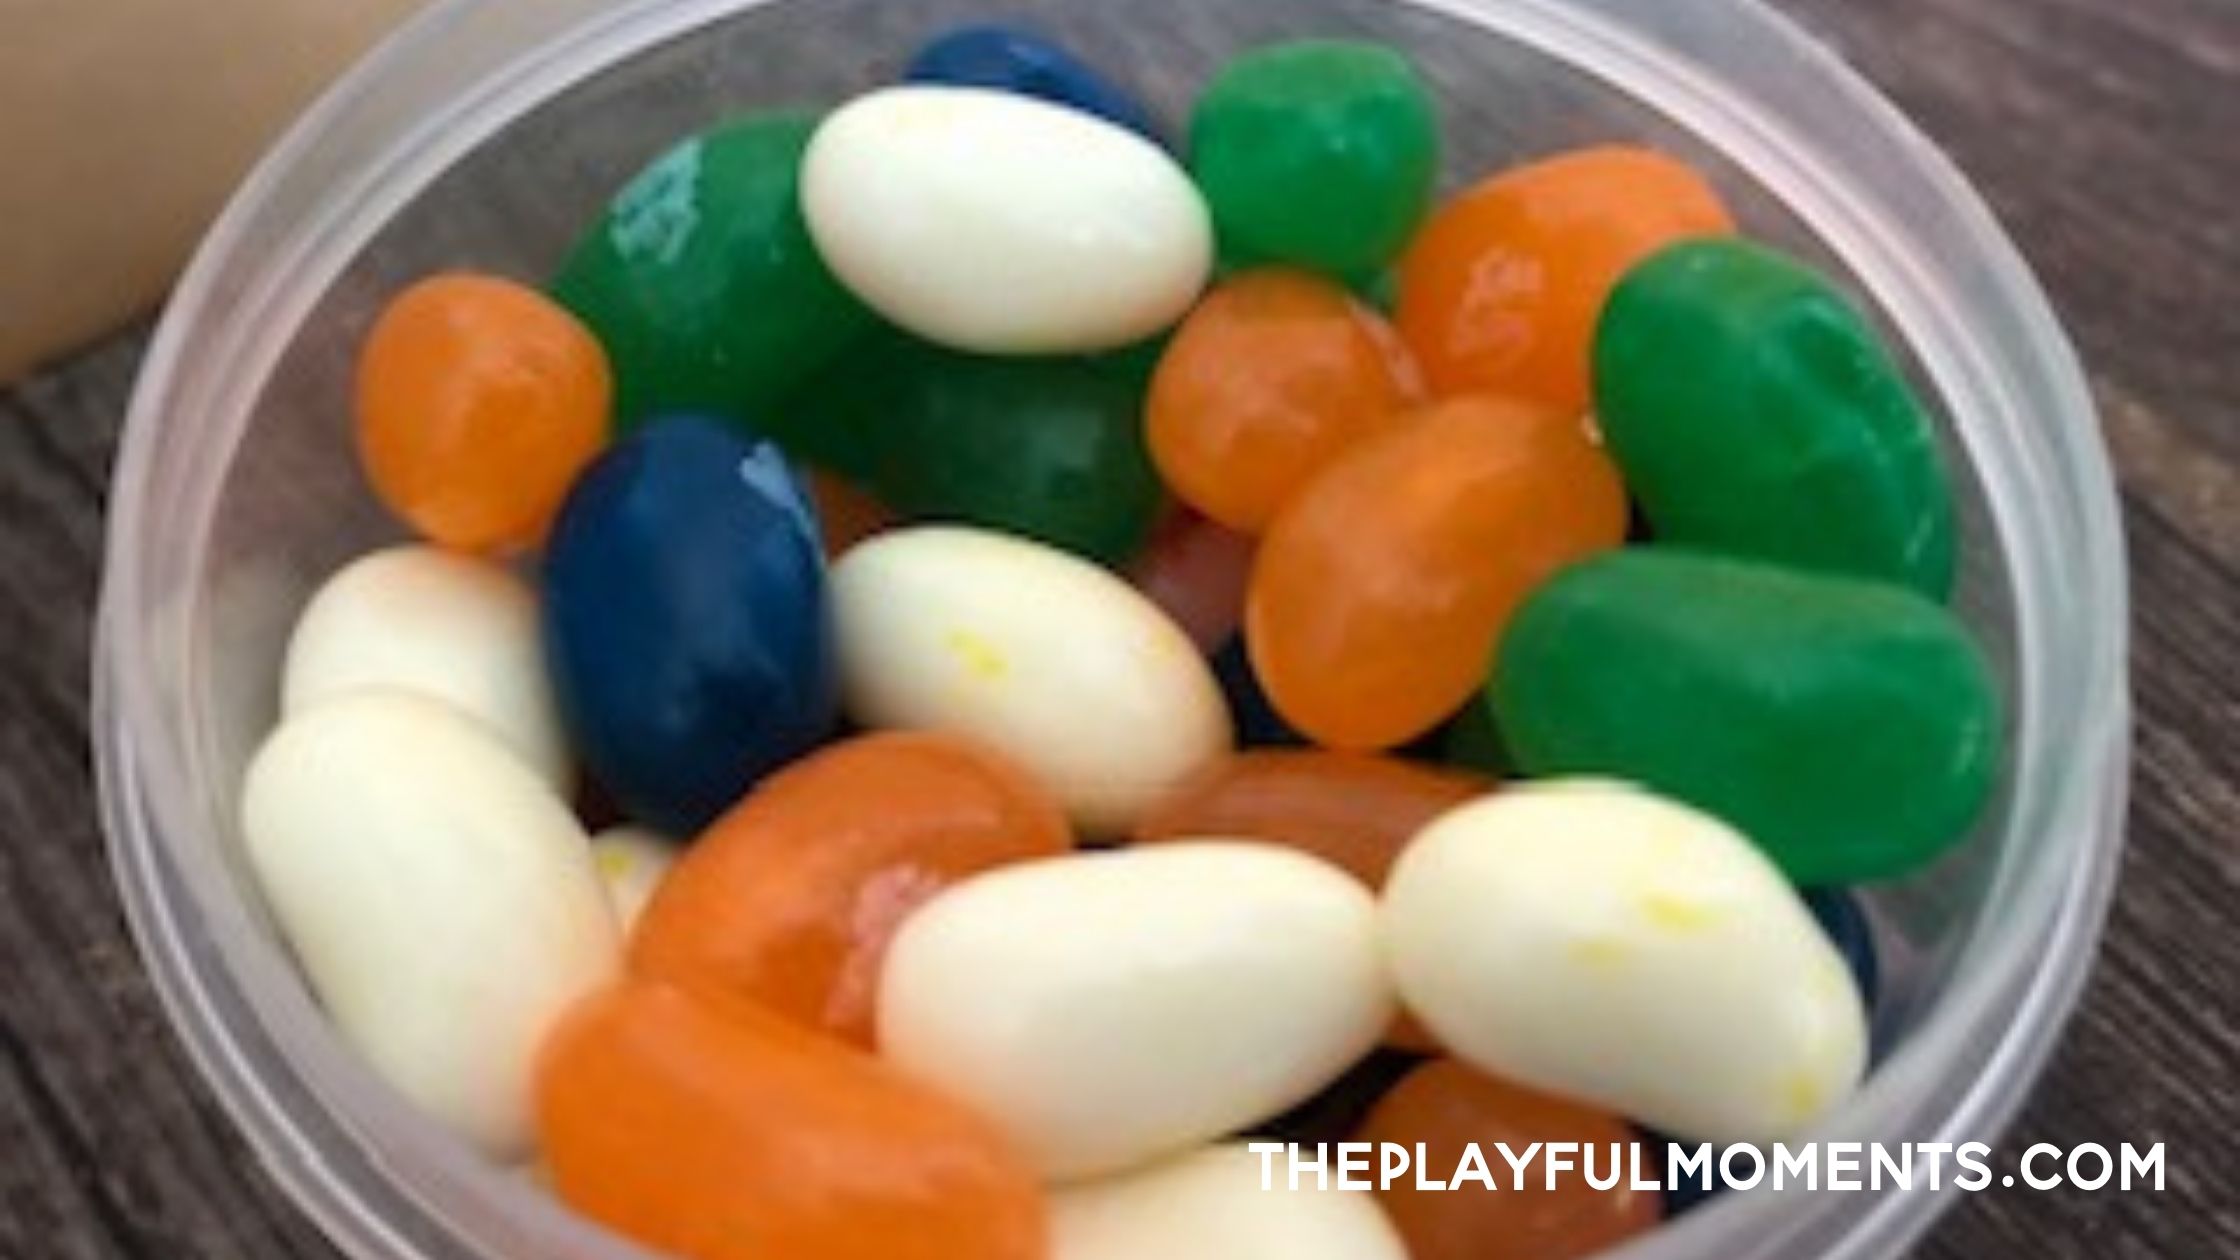 Jelly beans in container